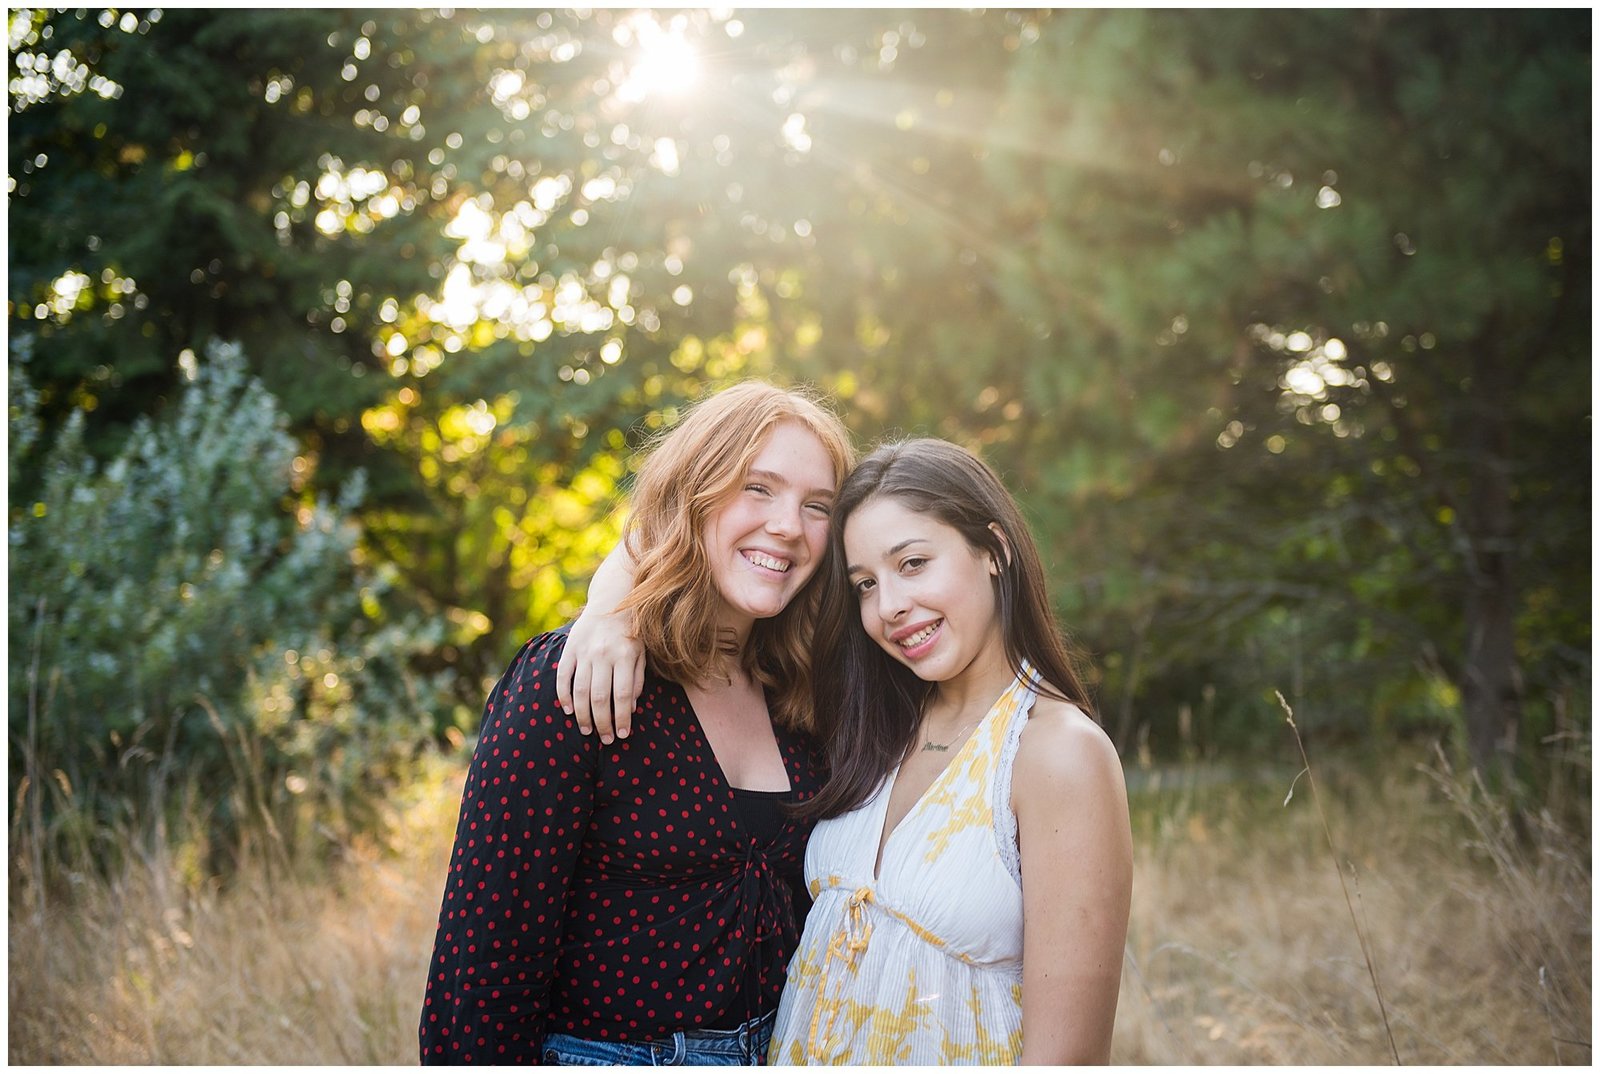 Two Senior Graduating Girlfriends in field at sunset Emily Ann Photography Seattle Photographer